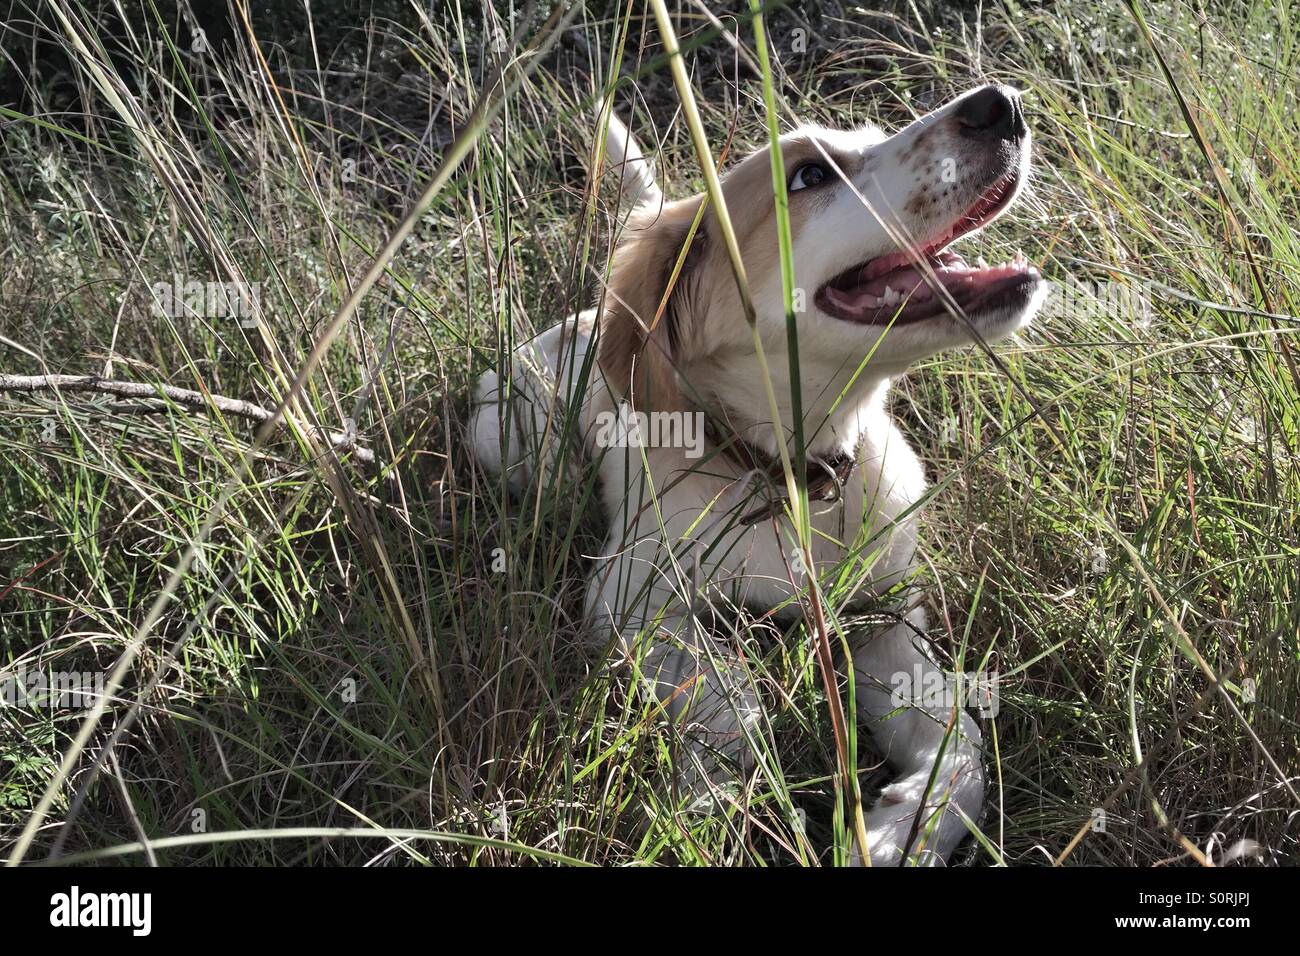 Puppy in a field Stock Photo